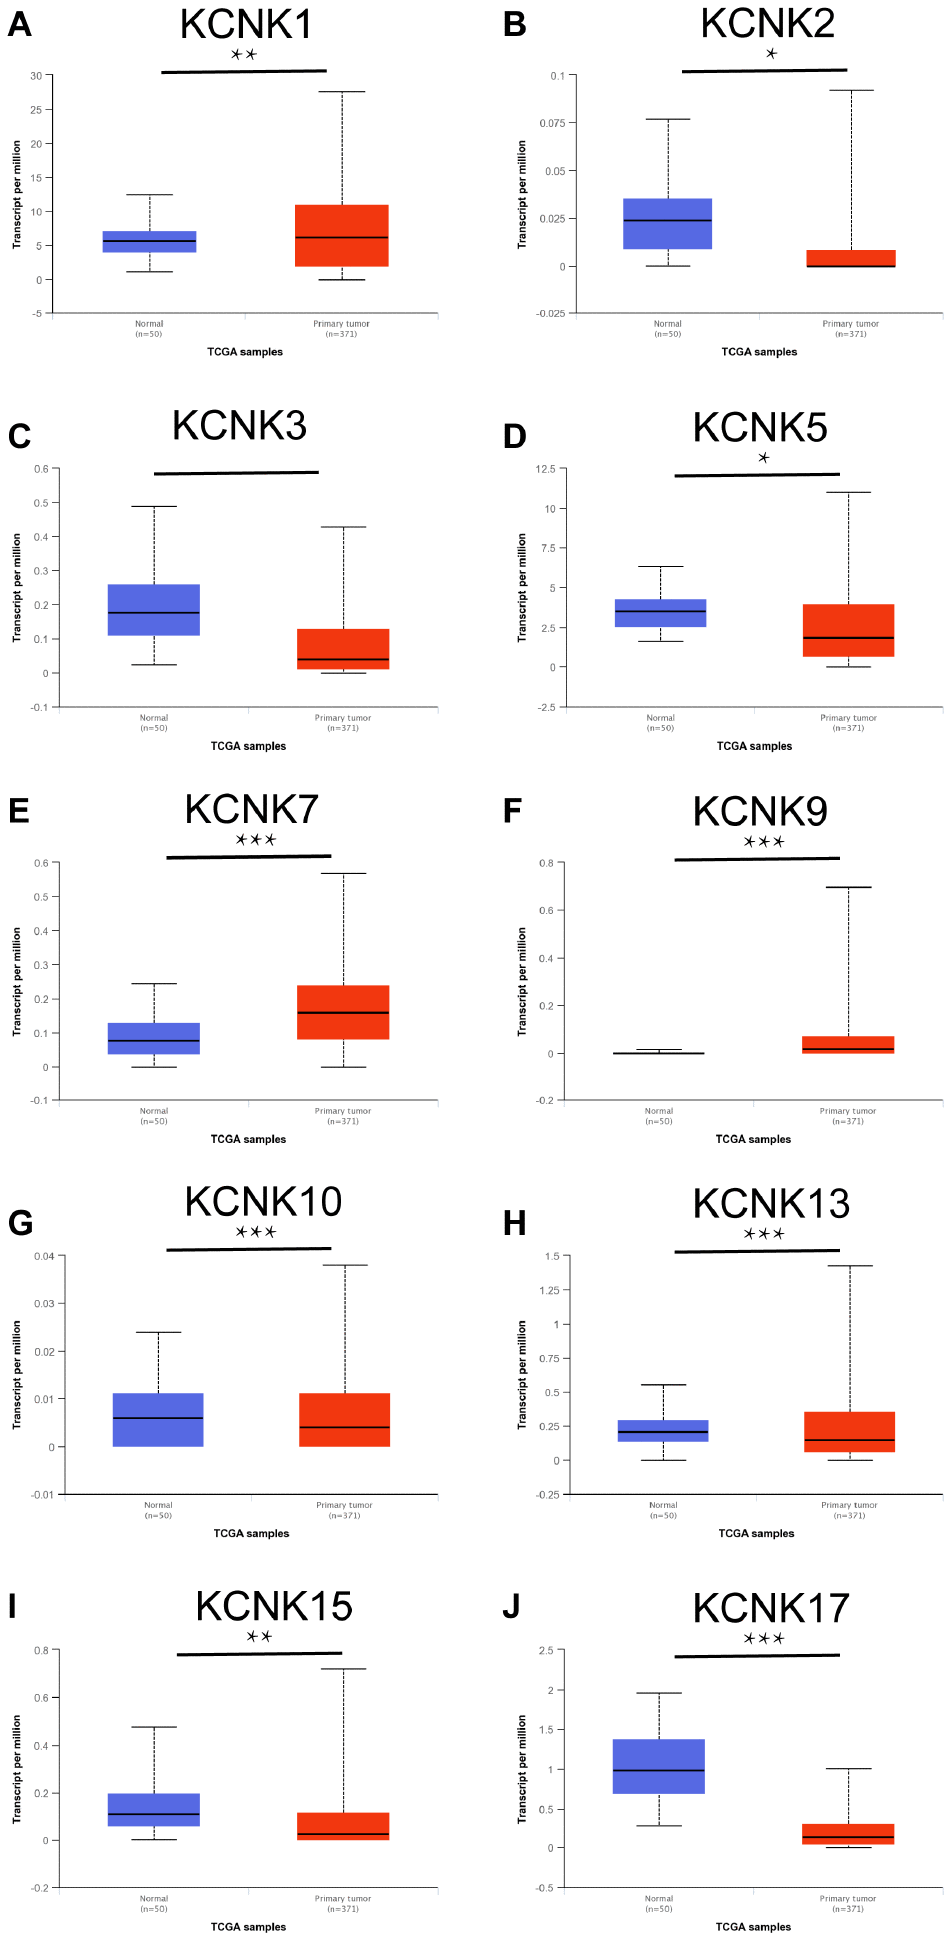 KCNKs are differentially expressed between HCC and normal tissue (UALCAN). KCNK1/7/9 mRNAs were overexpressed (A, E, F) while KCNK2/3/5/10/13/15/17 mRNAs were underexpressed (B, C, G, H, I, J) in primary HCC tissues compared to normal samples. *p